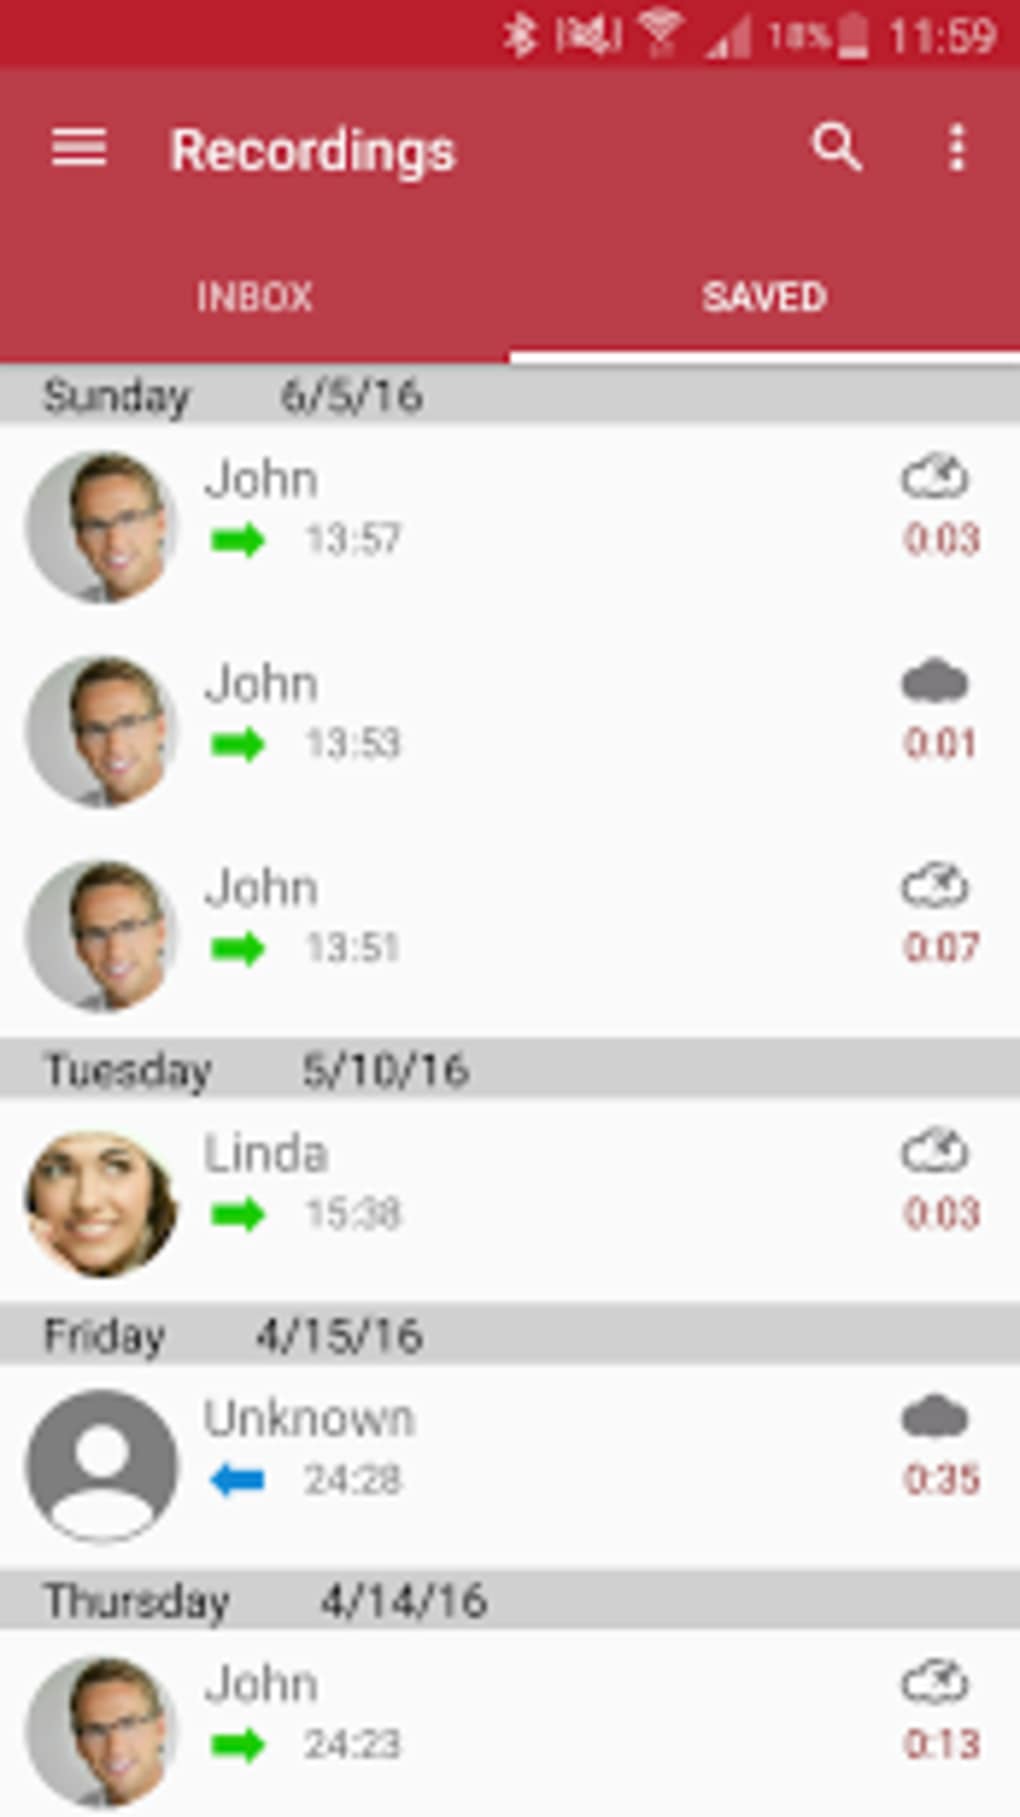 automatic call recorder pro apk download for free